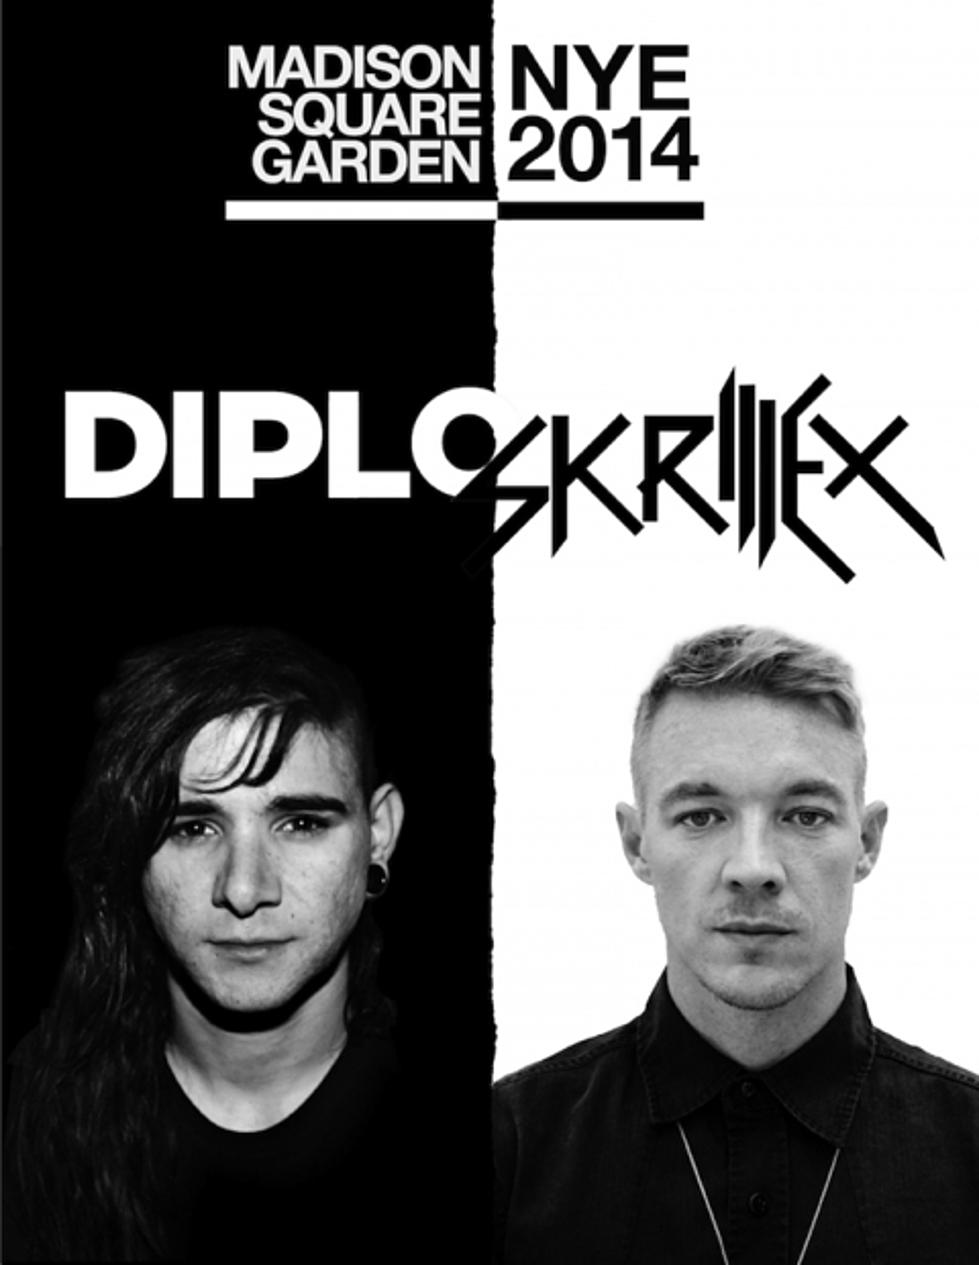 Diplo & Skrillex playing MSG on New Year's Eve, released “Take U There” ft.  Kiesza (listen